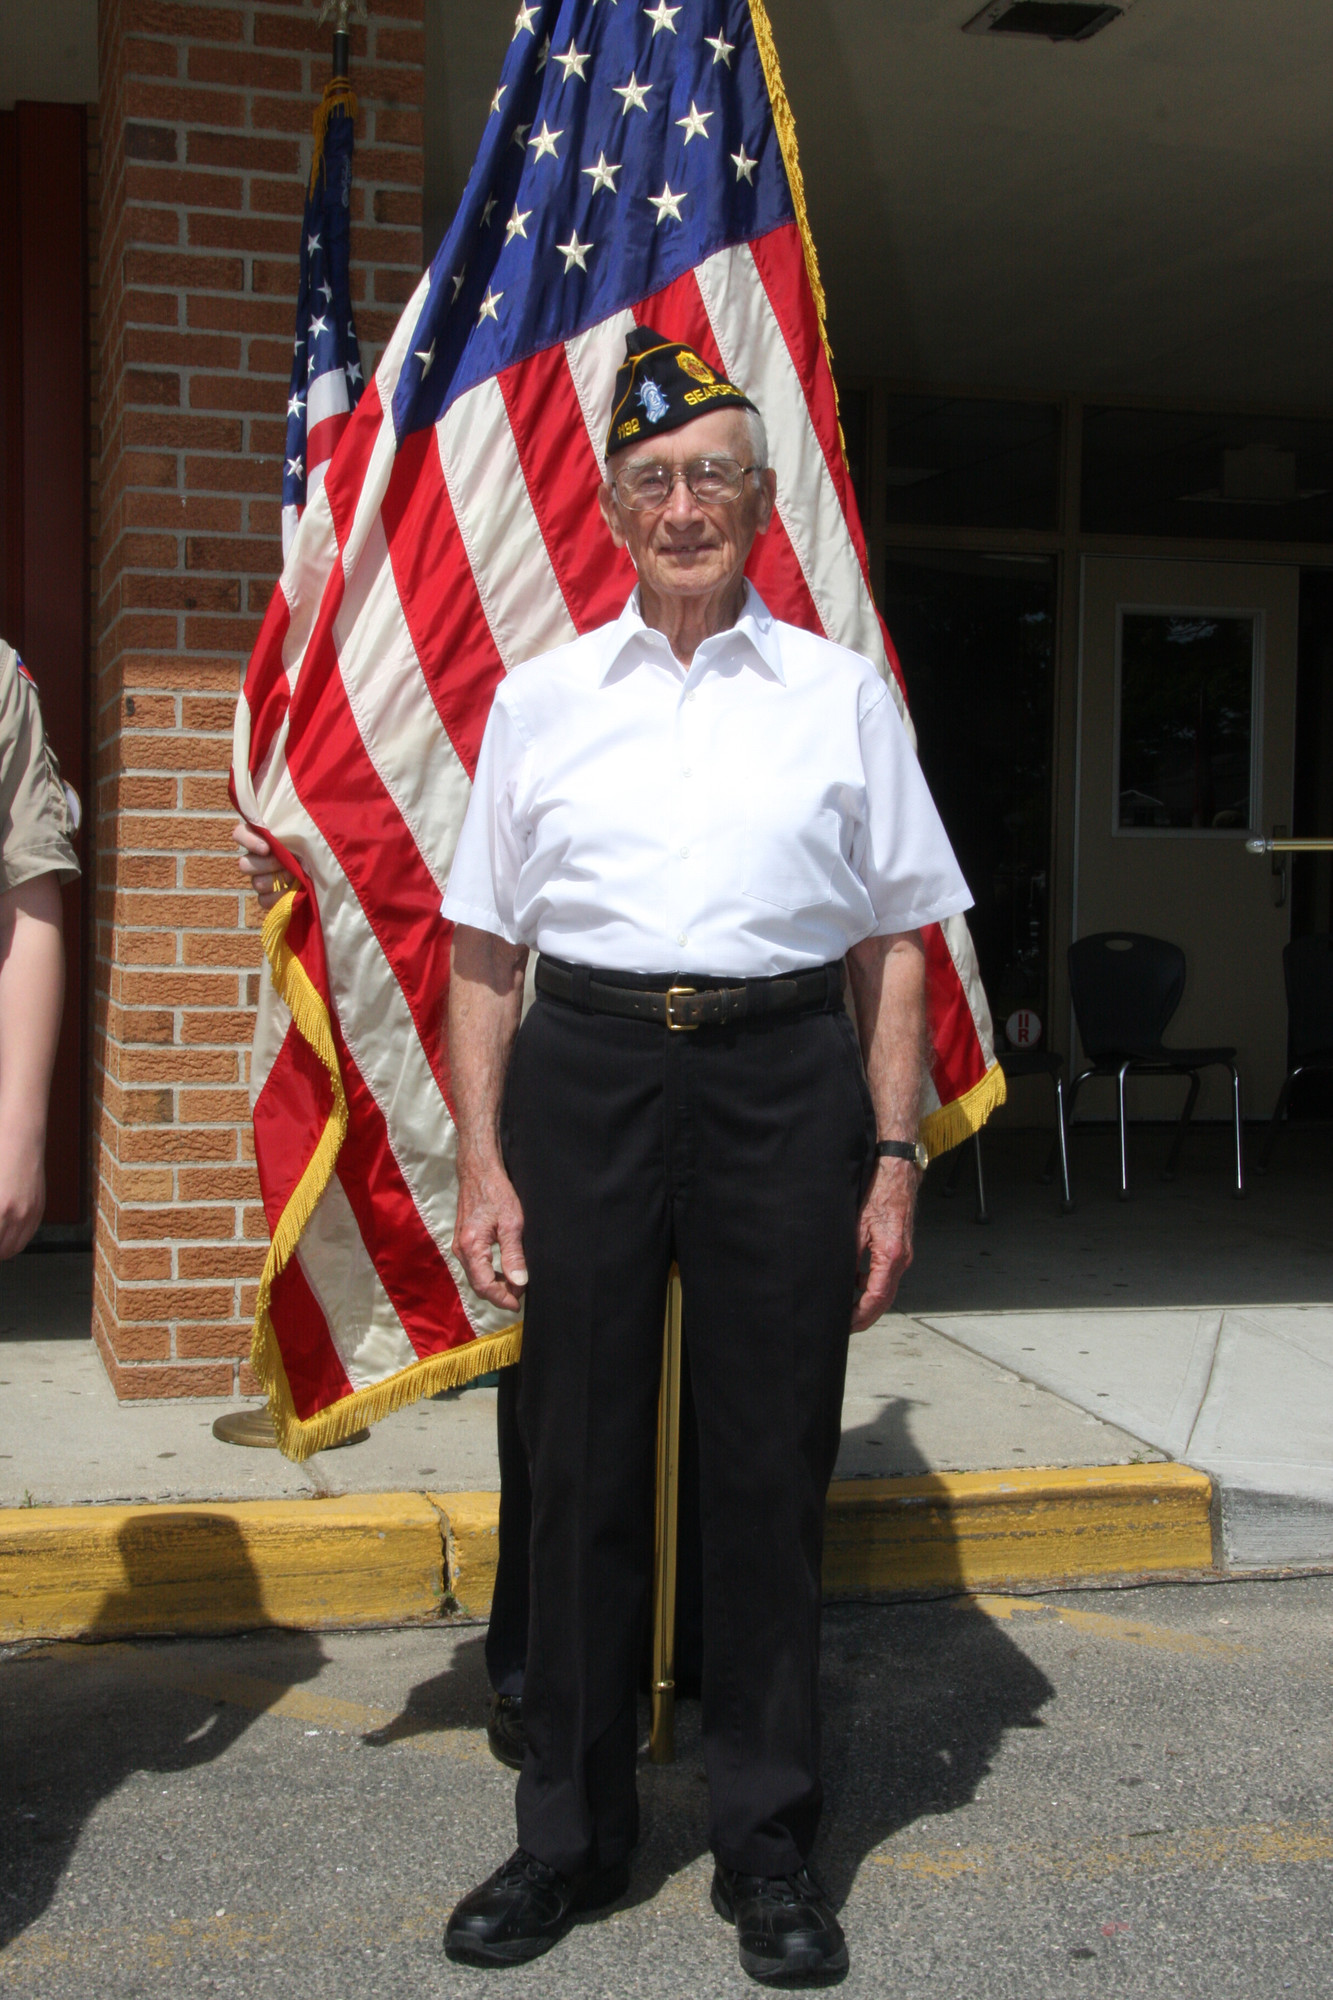 Taylor Diehlmann, at World War II veteran, at 91 is the oldest member of the Seaford American Legion